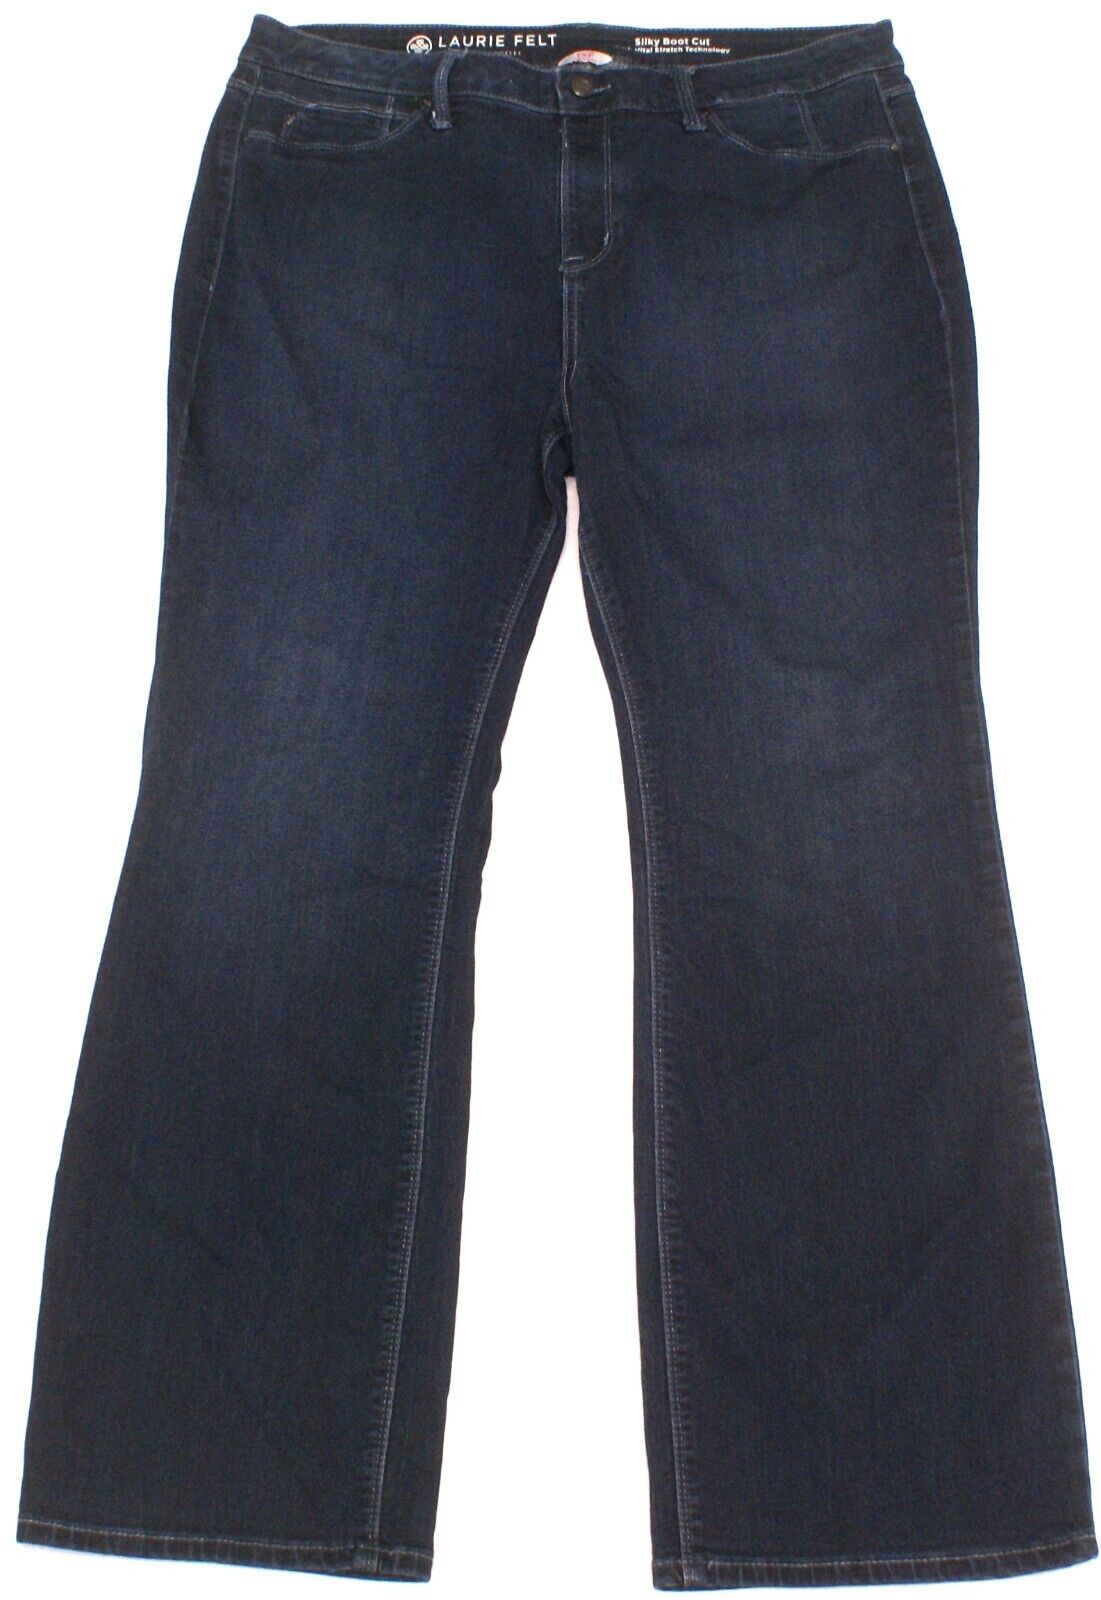 Laurie Felt Womens Silky Boot Cut Pull On Stretch Jeans Plus Size 1X P